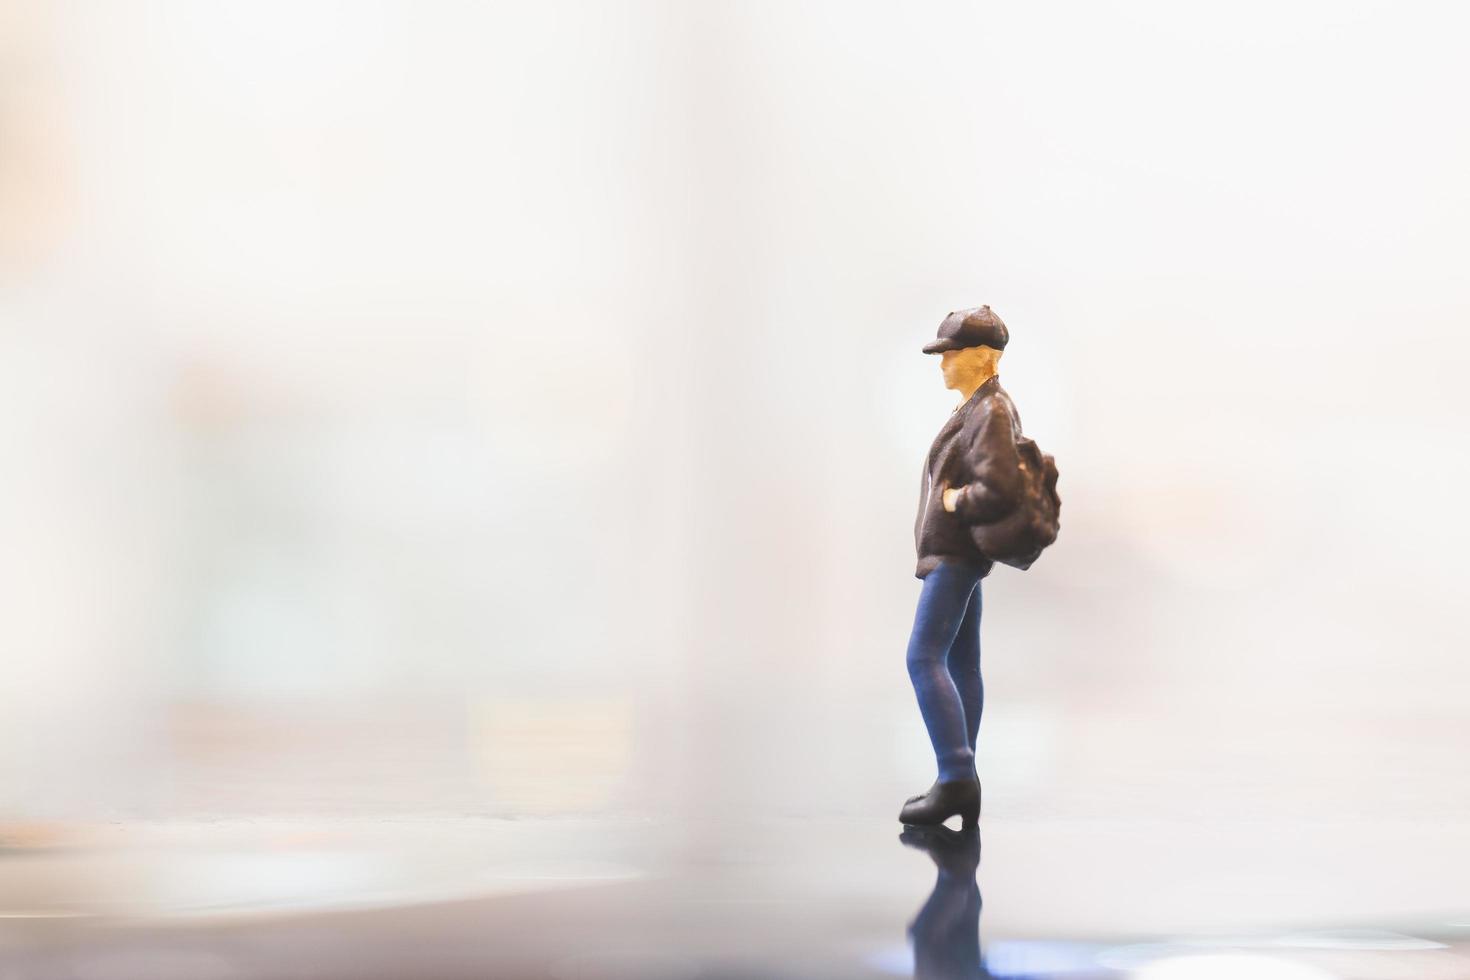 Miniature traveler with a backpack walking on empty space, travel concept photo